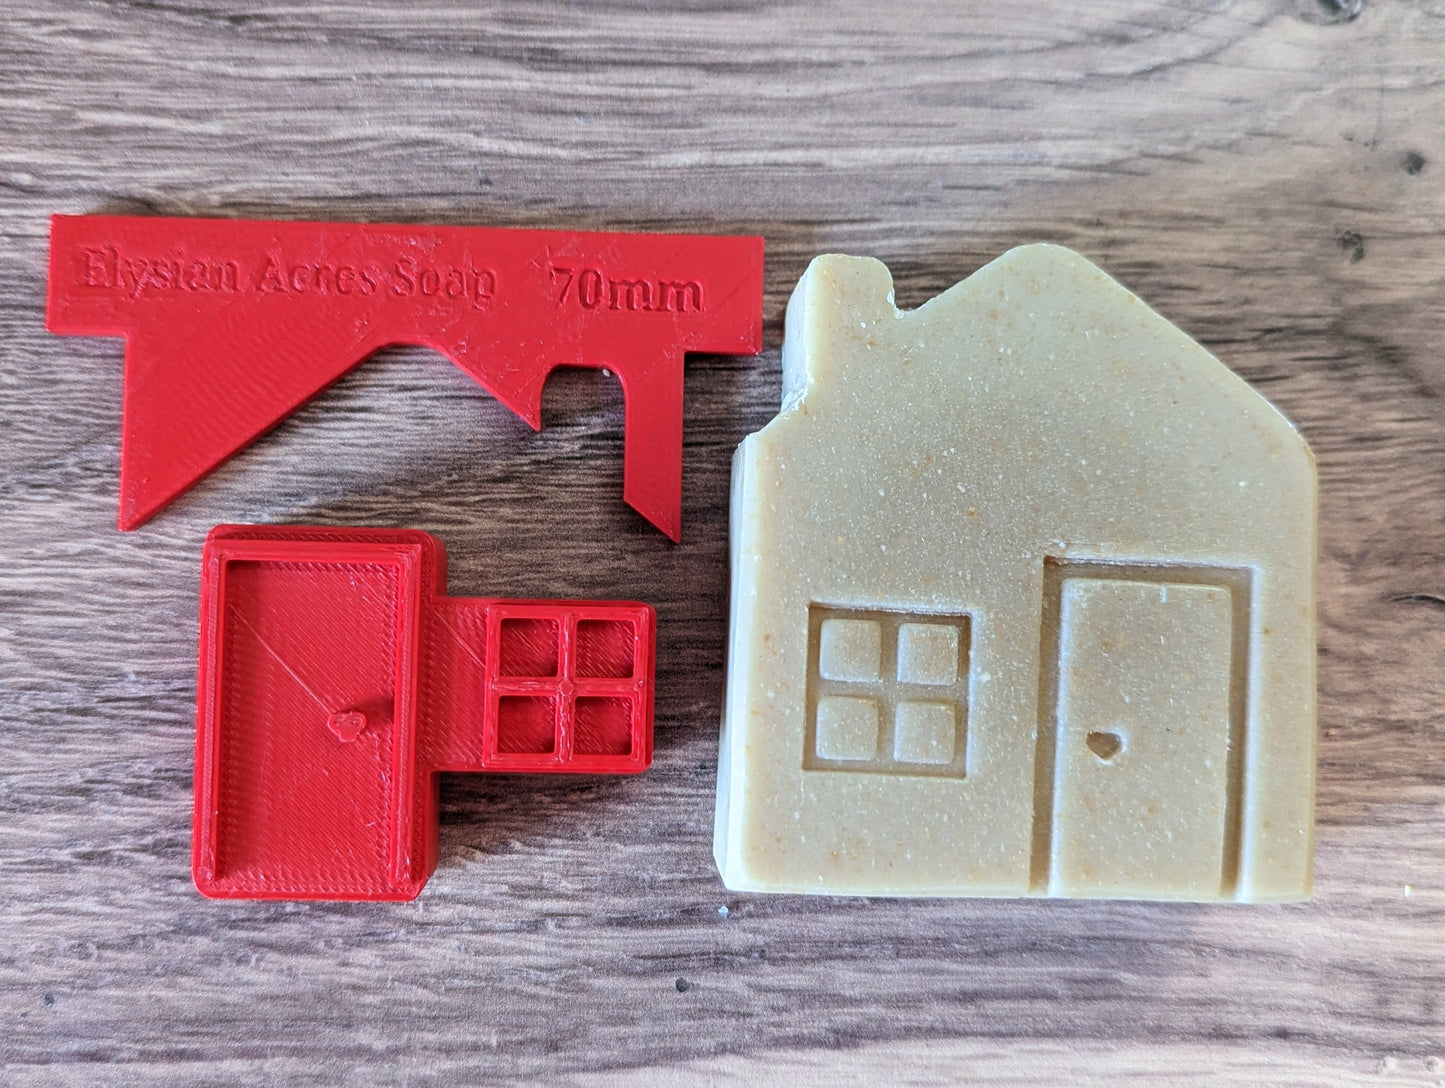 Soapmaking Tools: Home Sweet Home Scraper & Stamp set - 70mm wide